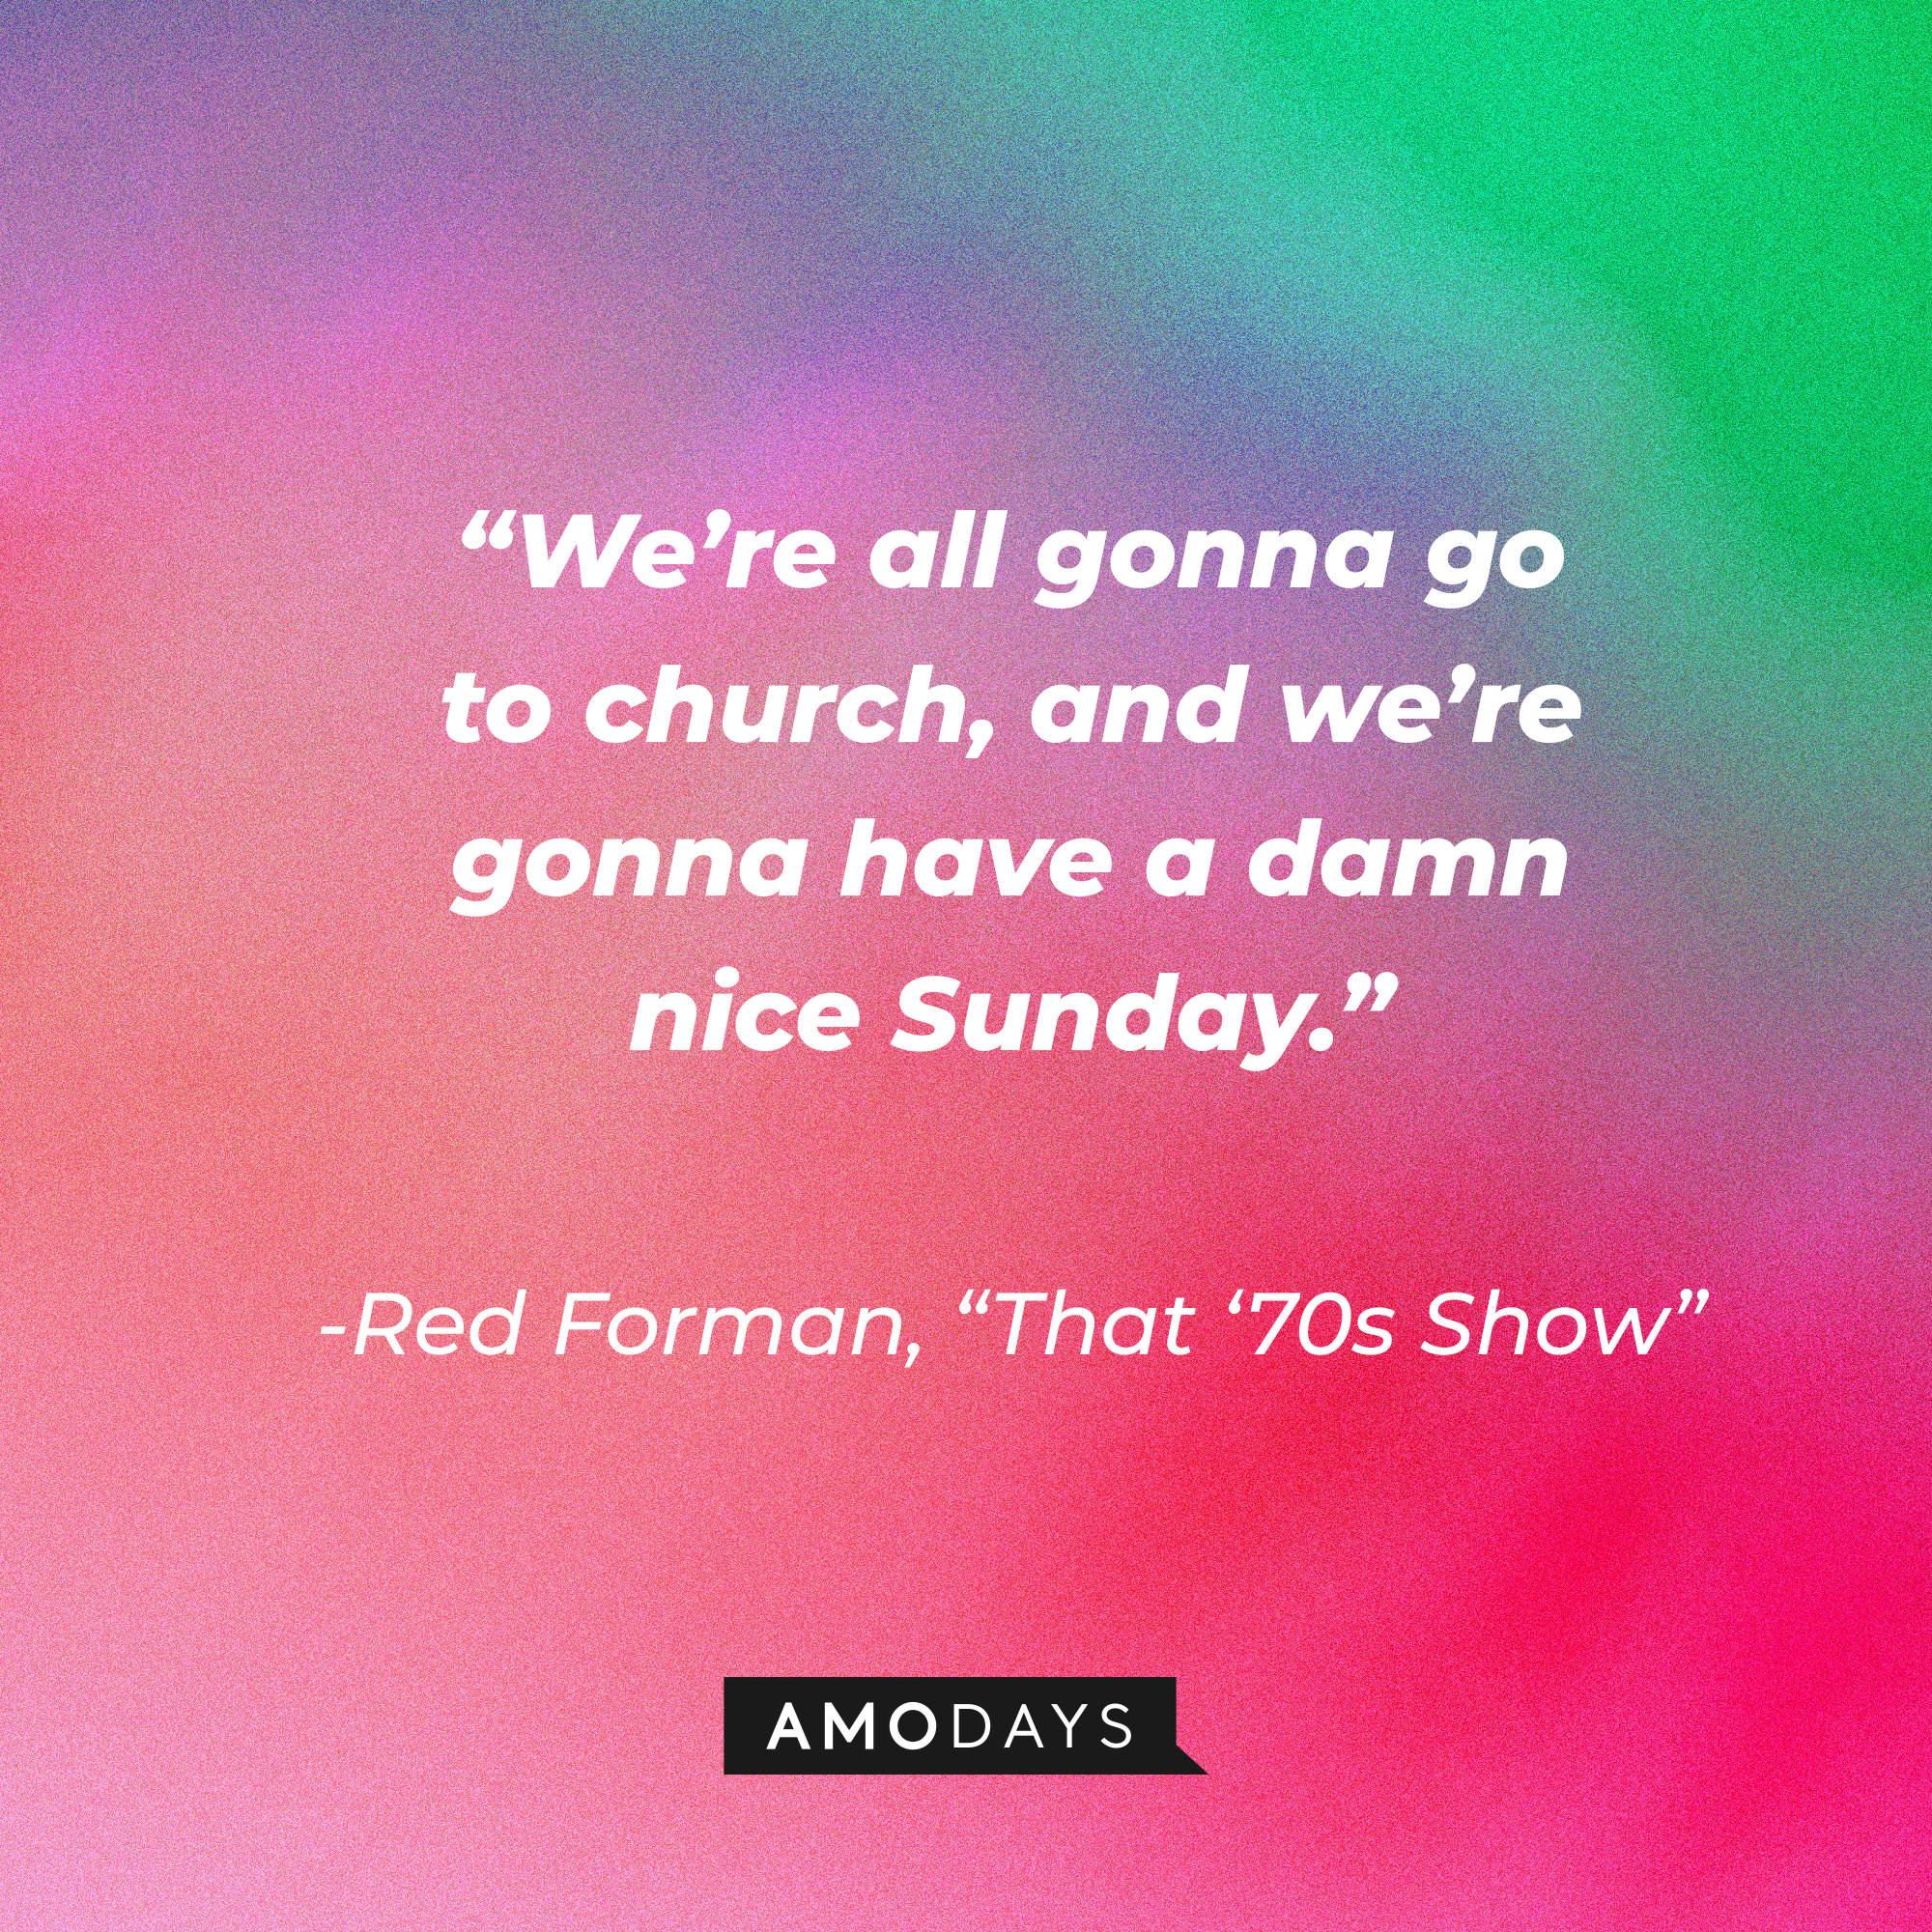 Red Forman's quote from "That '70s Show:" “We’re all gonna go to church, and we’re gonna have a damn nice Sunday.” | Source: AmoDays